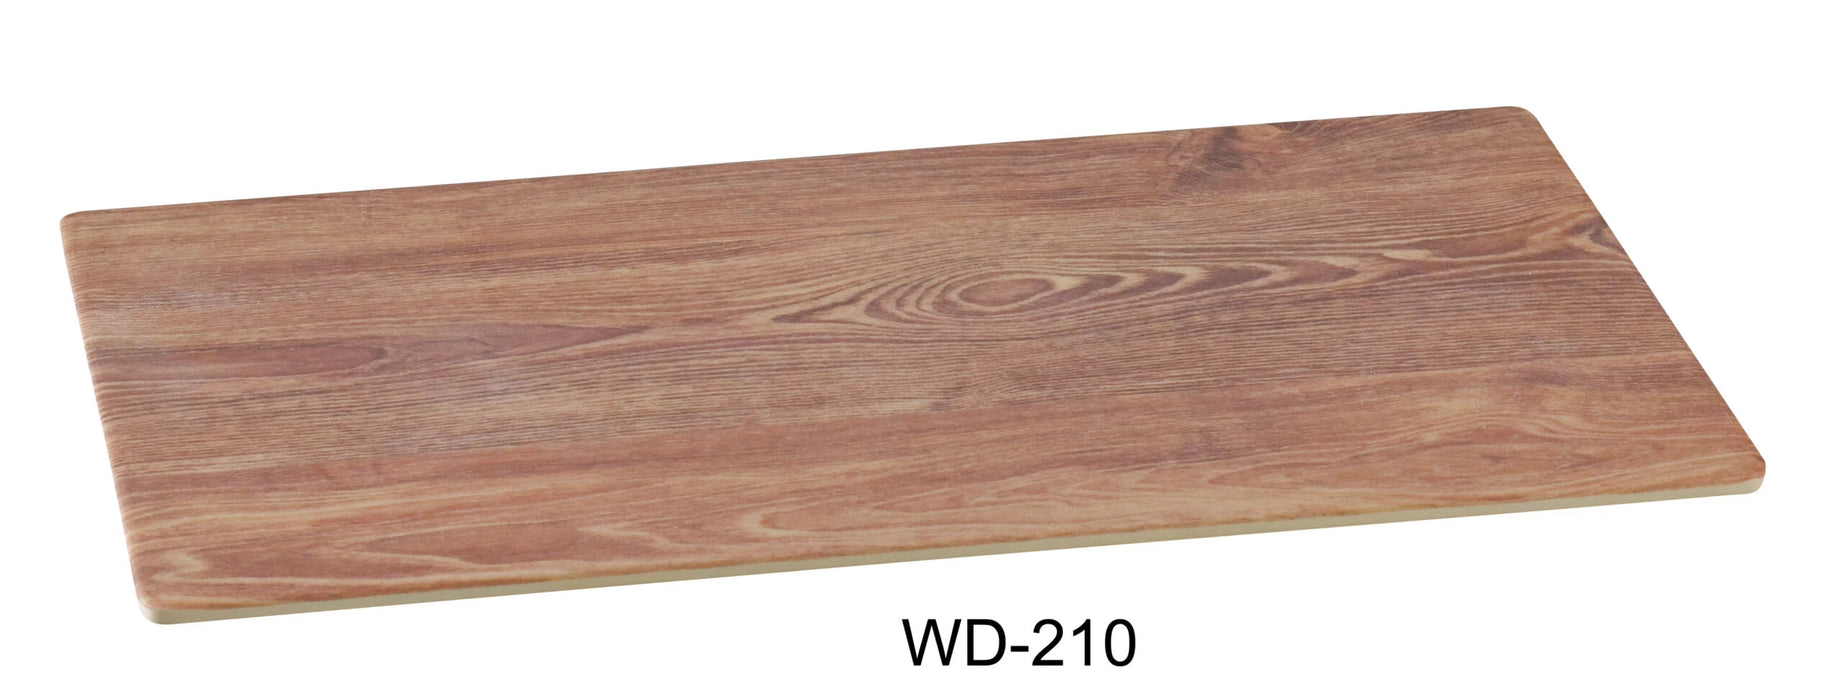 Yanco WD-210 Rectangular Wooden Tray, 10.5″ Length, 6.25″ Width, Melamine, Brown Color, Pack of 24